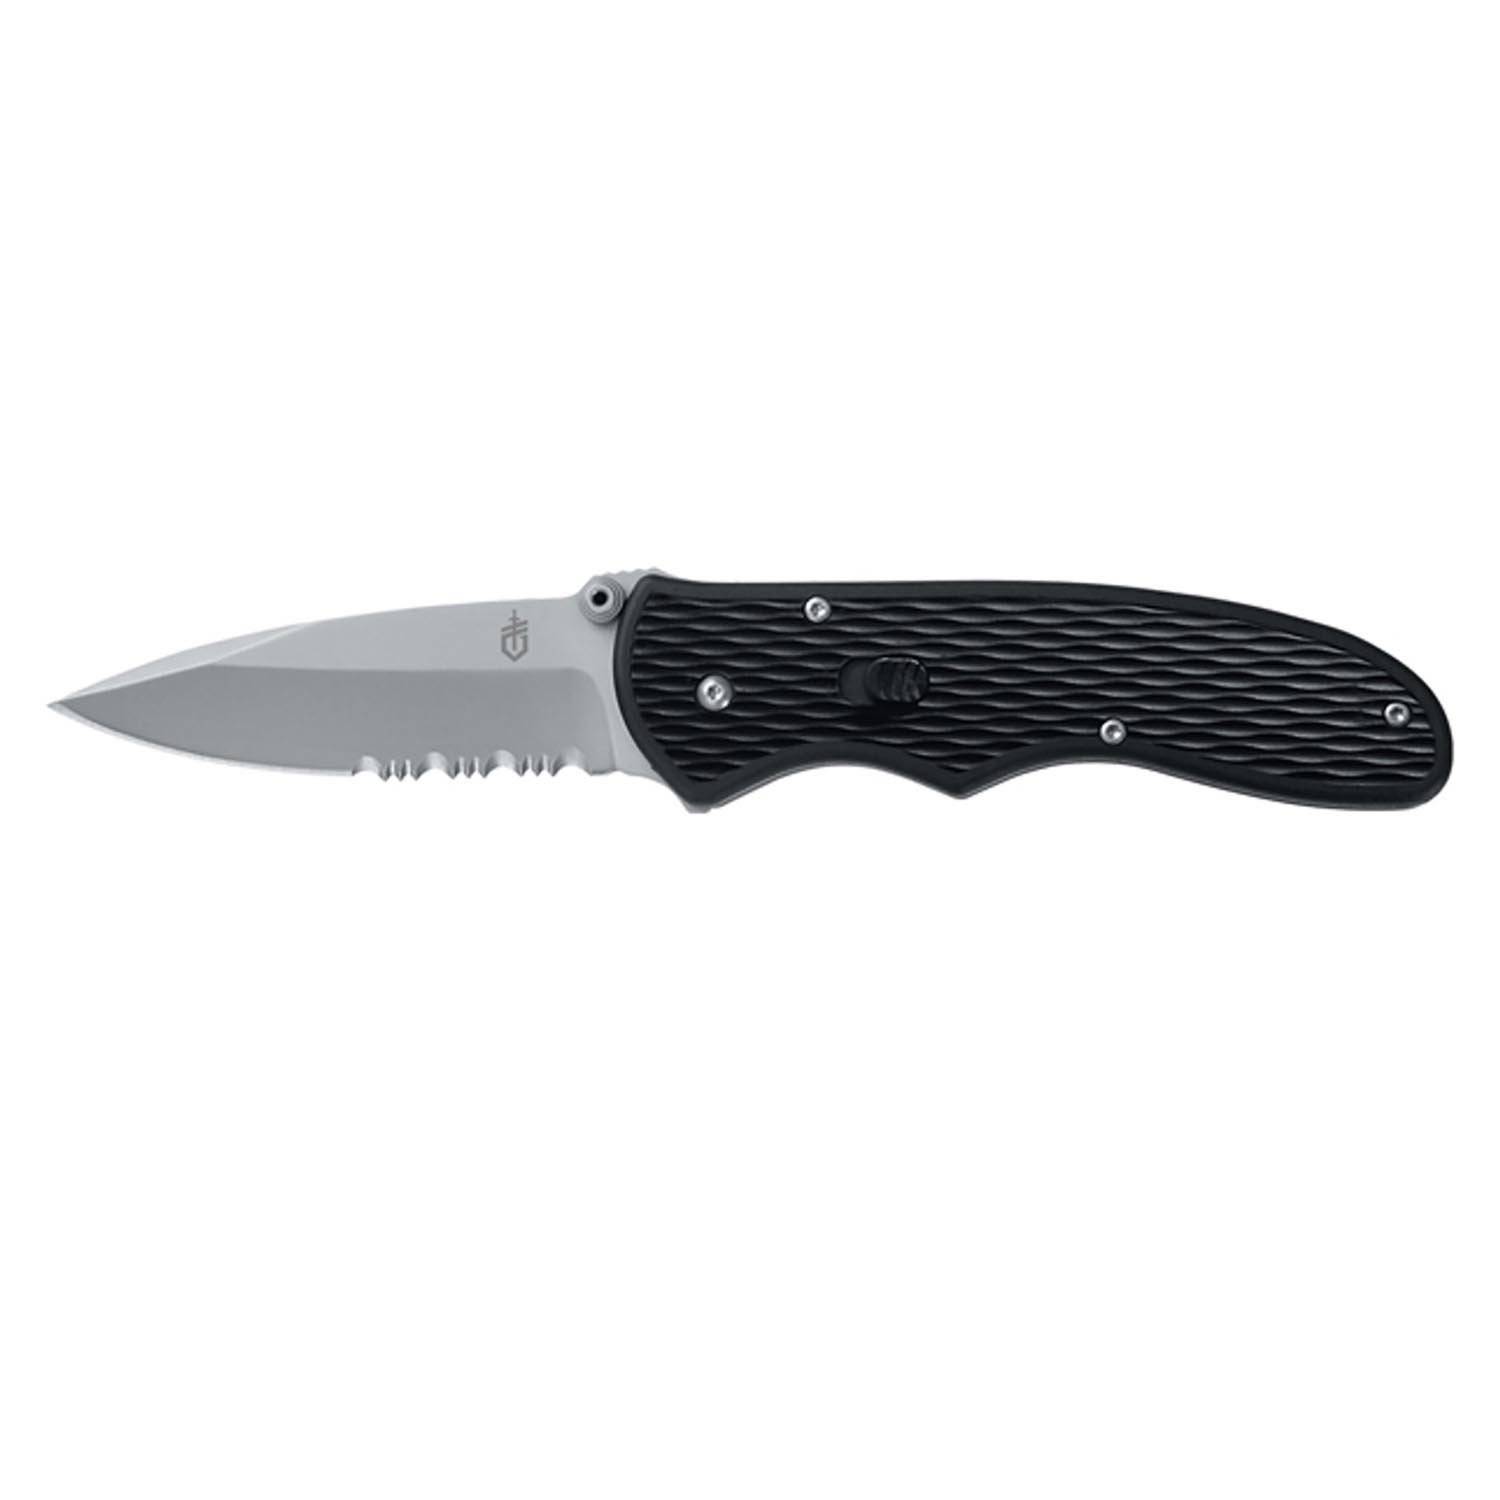 Gerber Fast Draw Assisted Opening Knife